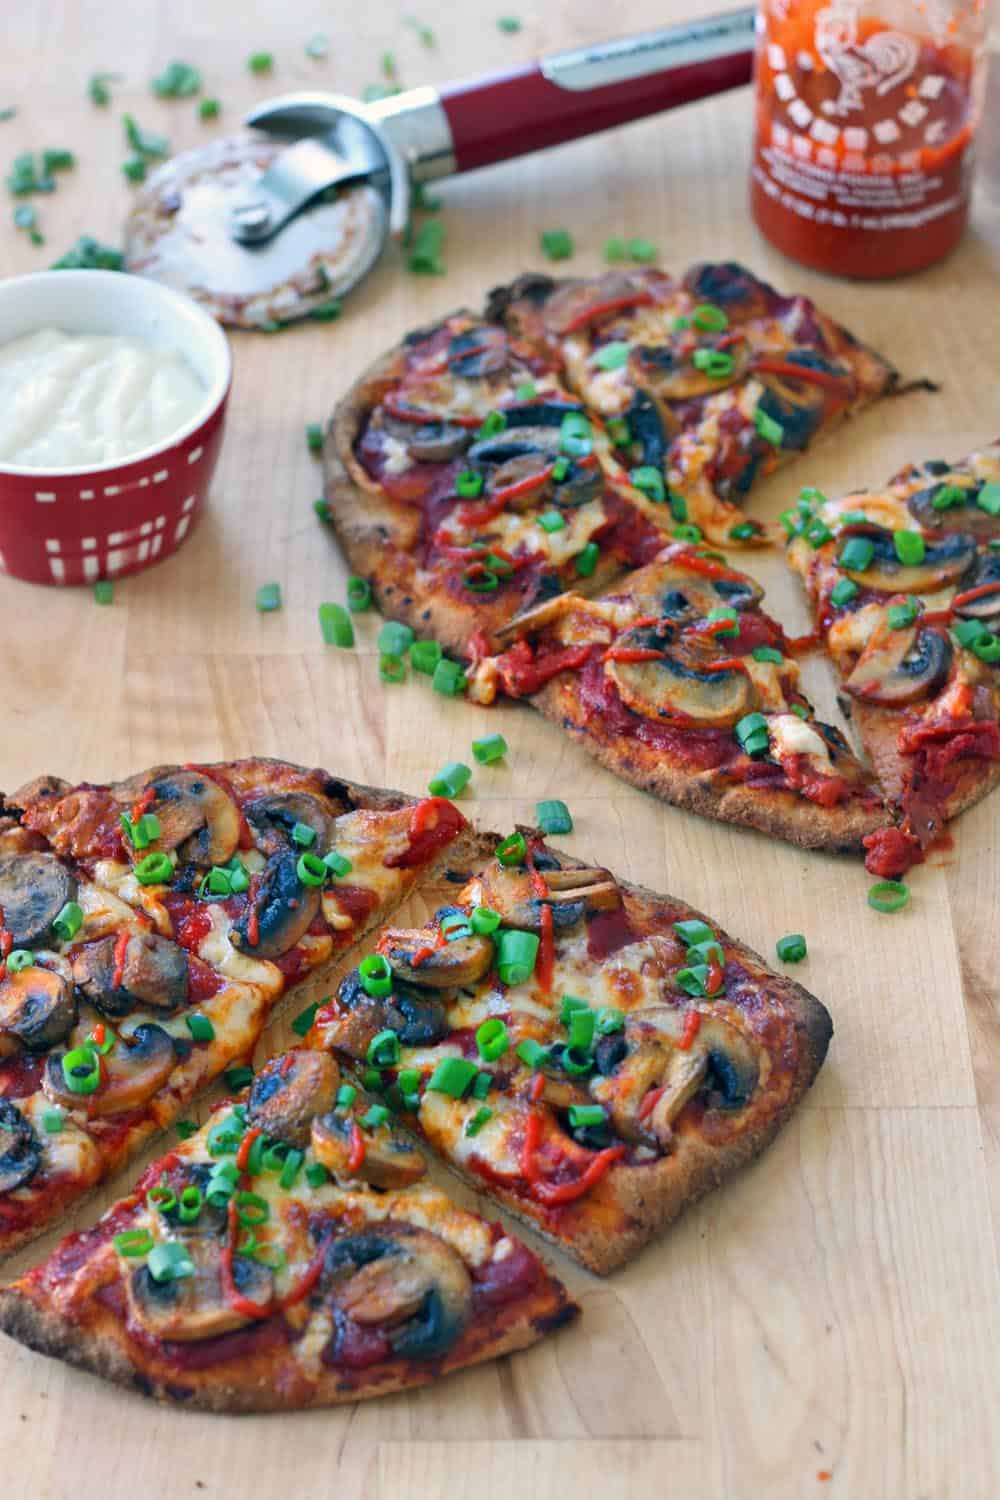 Two Buffalo mushroom naan pizzas on a wooden cutting board, each cut into fourths, with chopped scallions and ingredients scattered around.